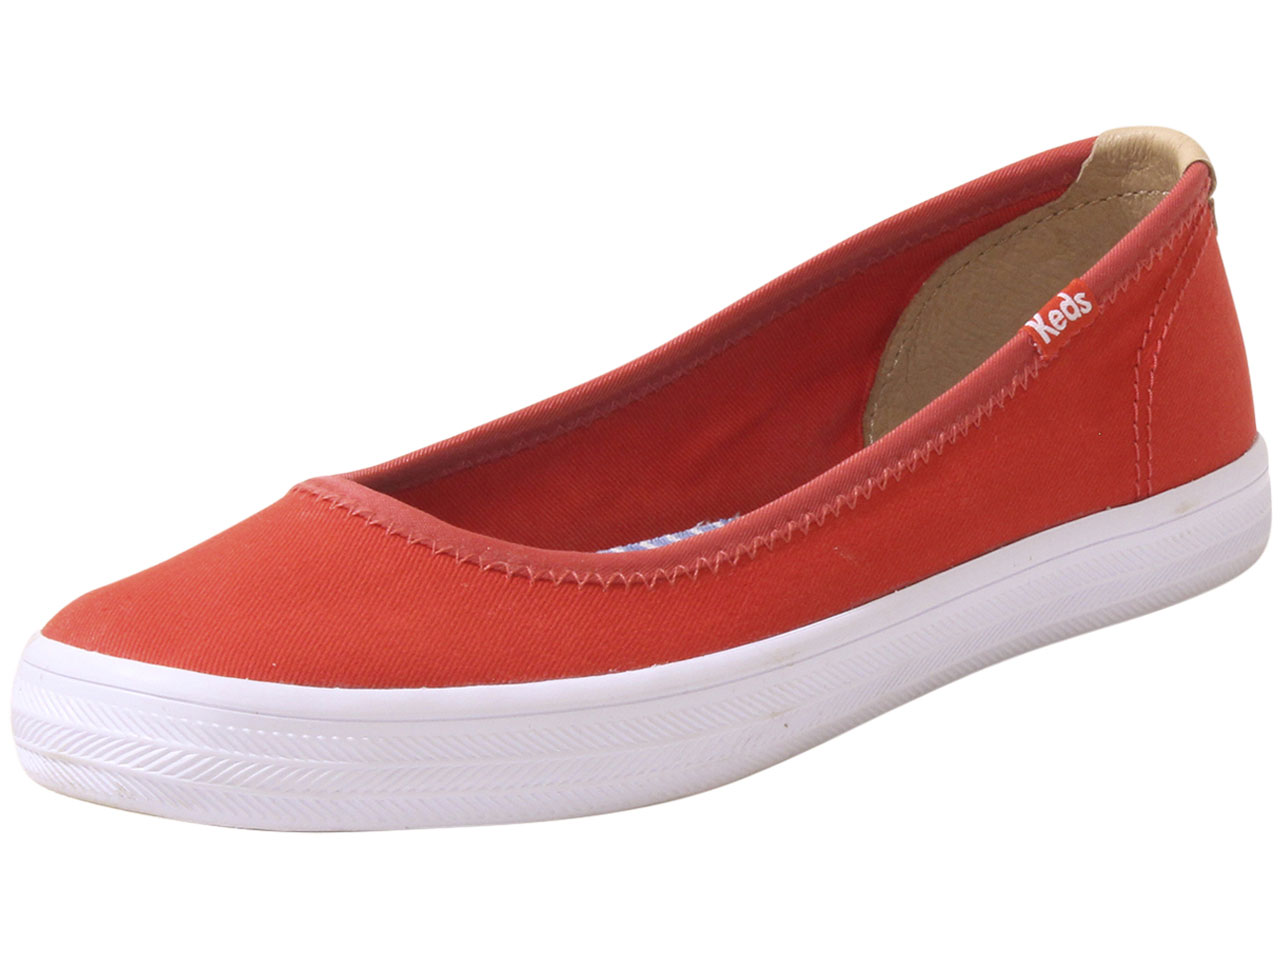 UPC 044212124543 product image for Keds Women's Bryn Ballet Flats Shoes Red Sz: 7 WF61839 - 7 B(M) US | upcitemdb.com